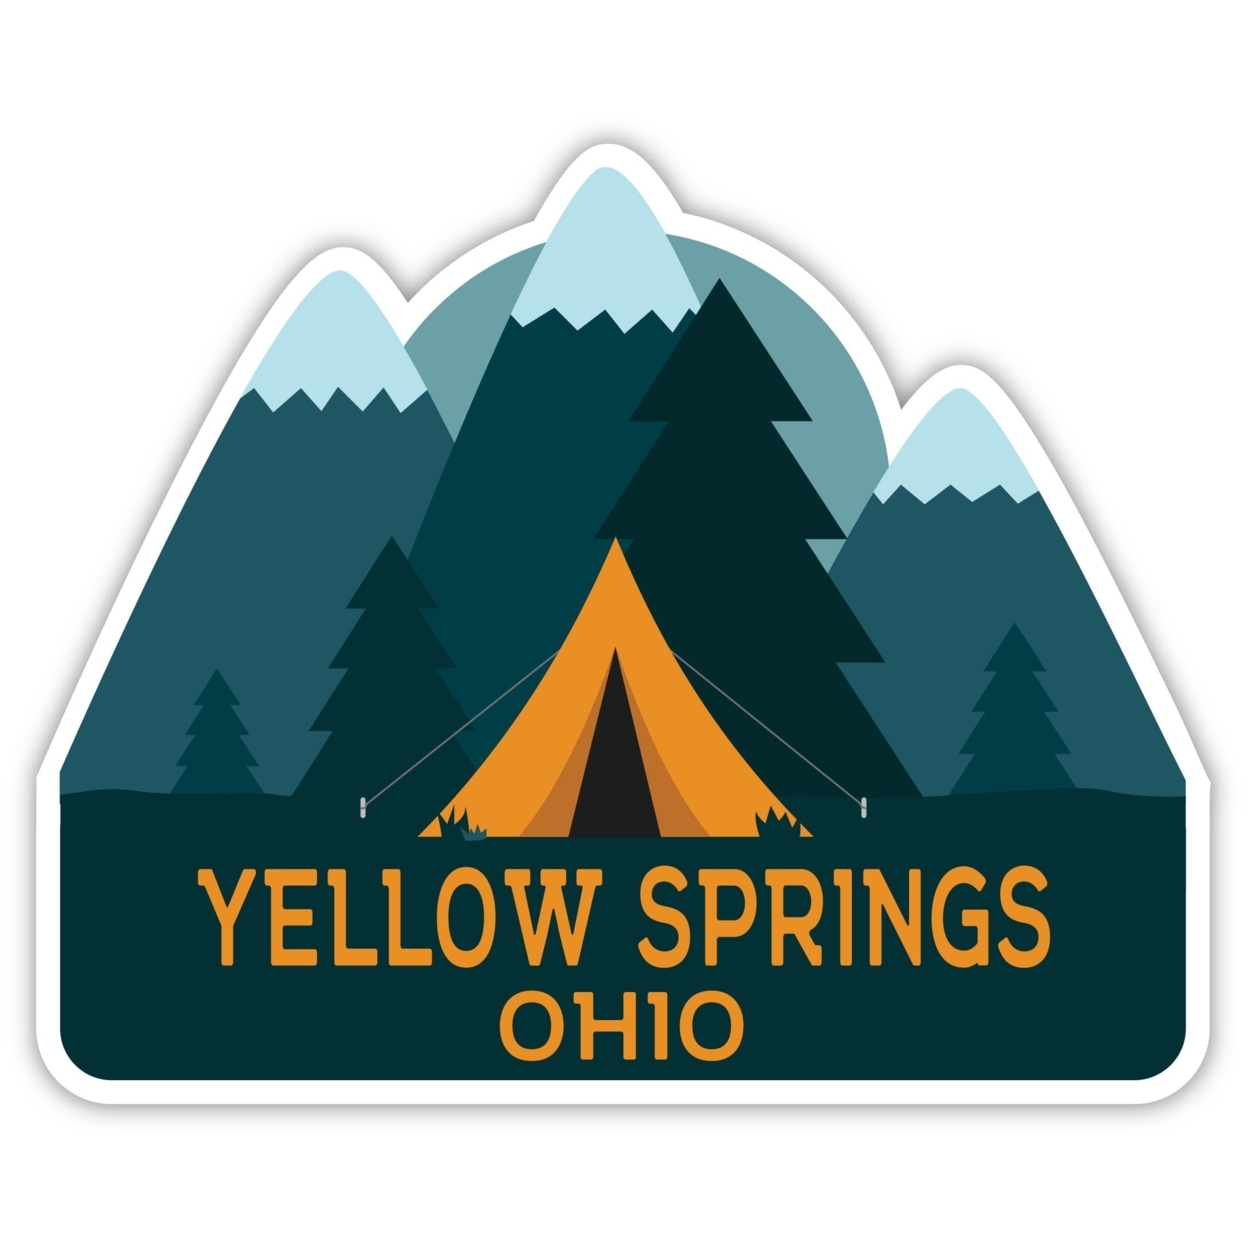 Yellow Springs Ohio Souvenir Decorative Stickers (Choose Theme And Size) - Single Unit, 2-Inch, Camp Life